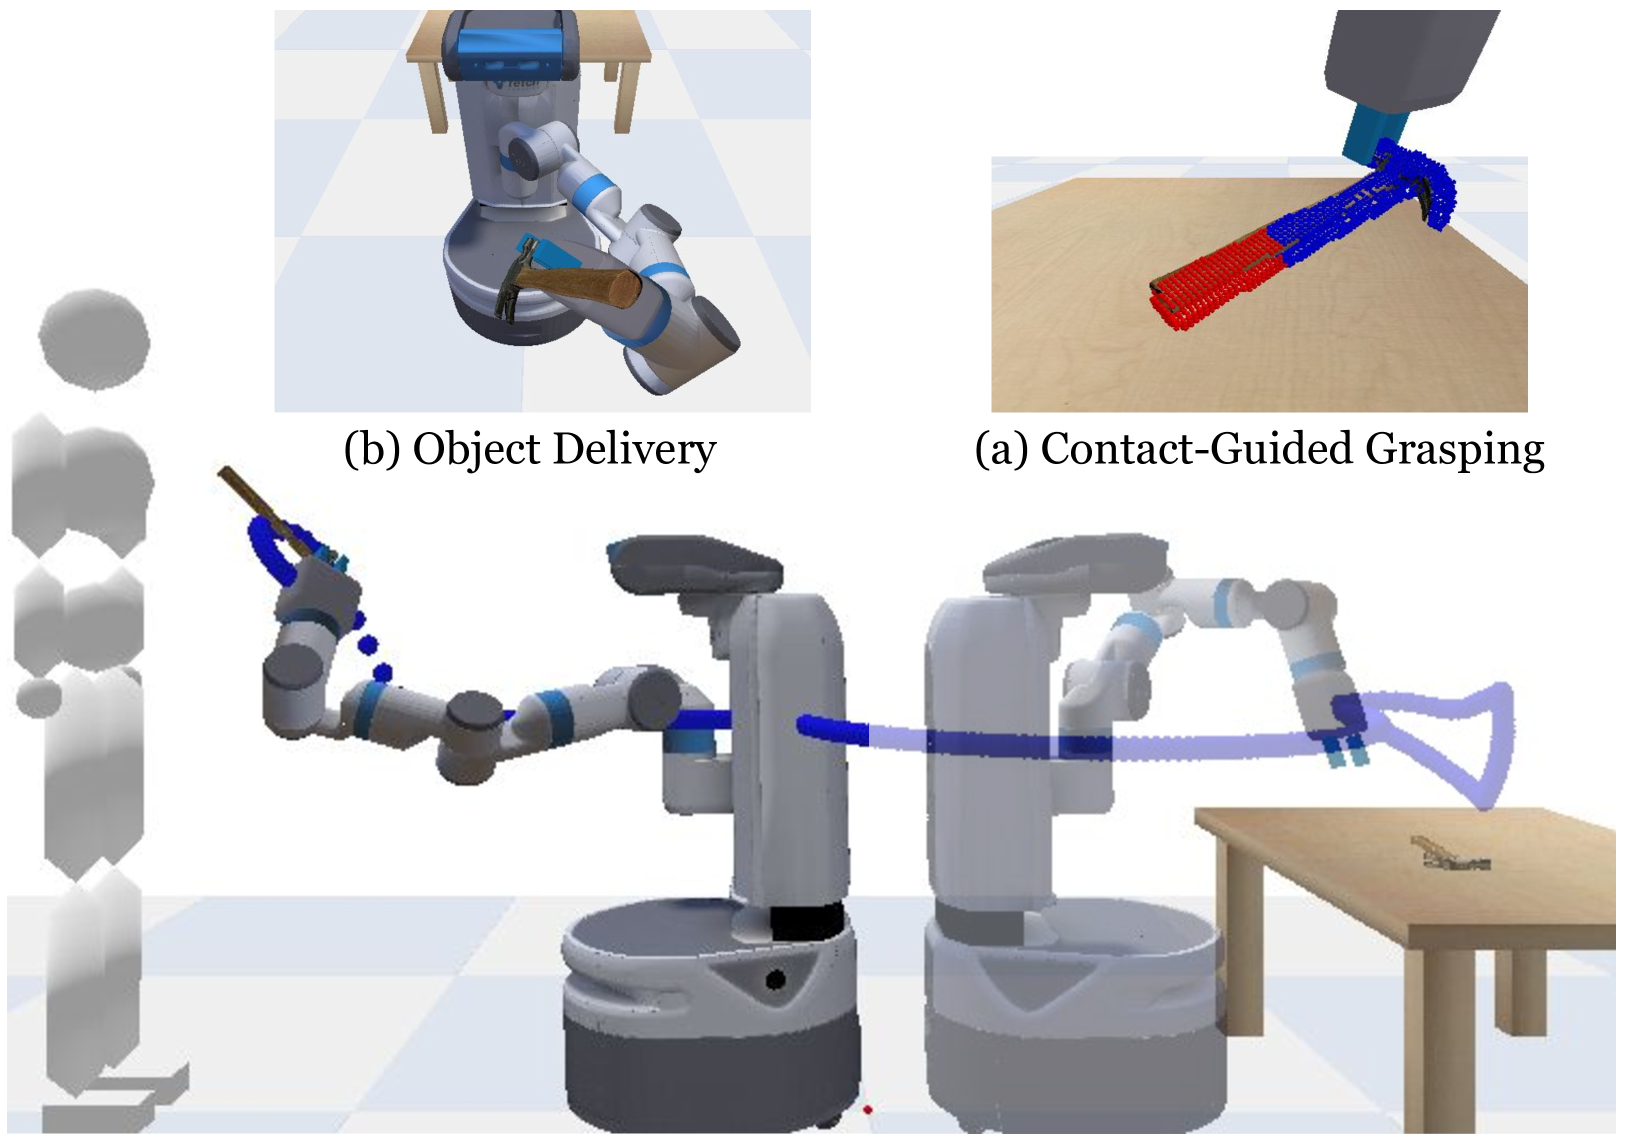 ContactHandover: Contact-Guided Robot-to-Human Object Handover